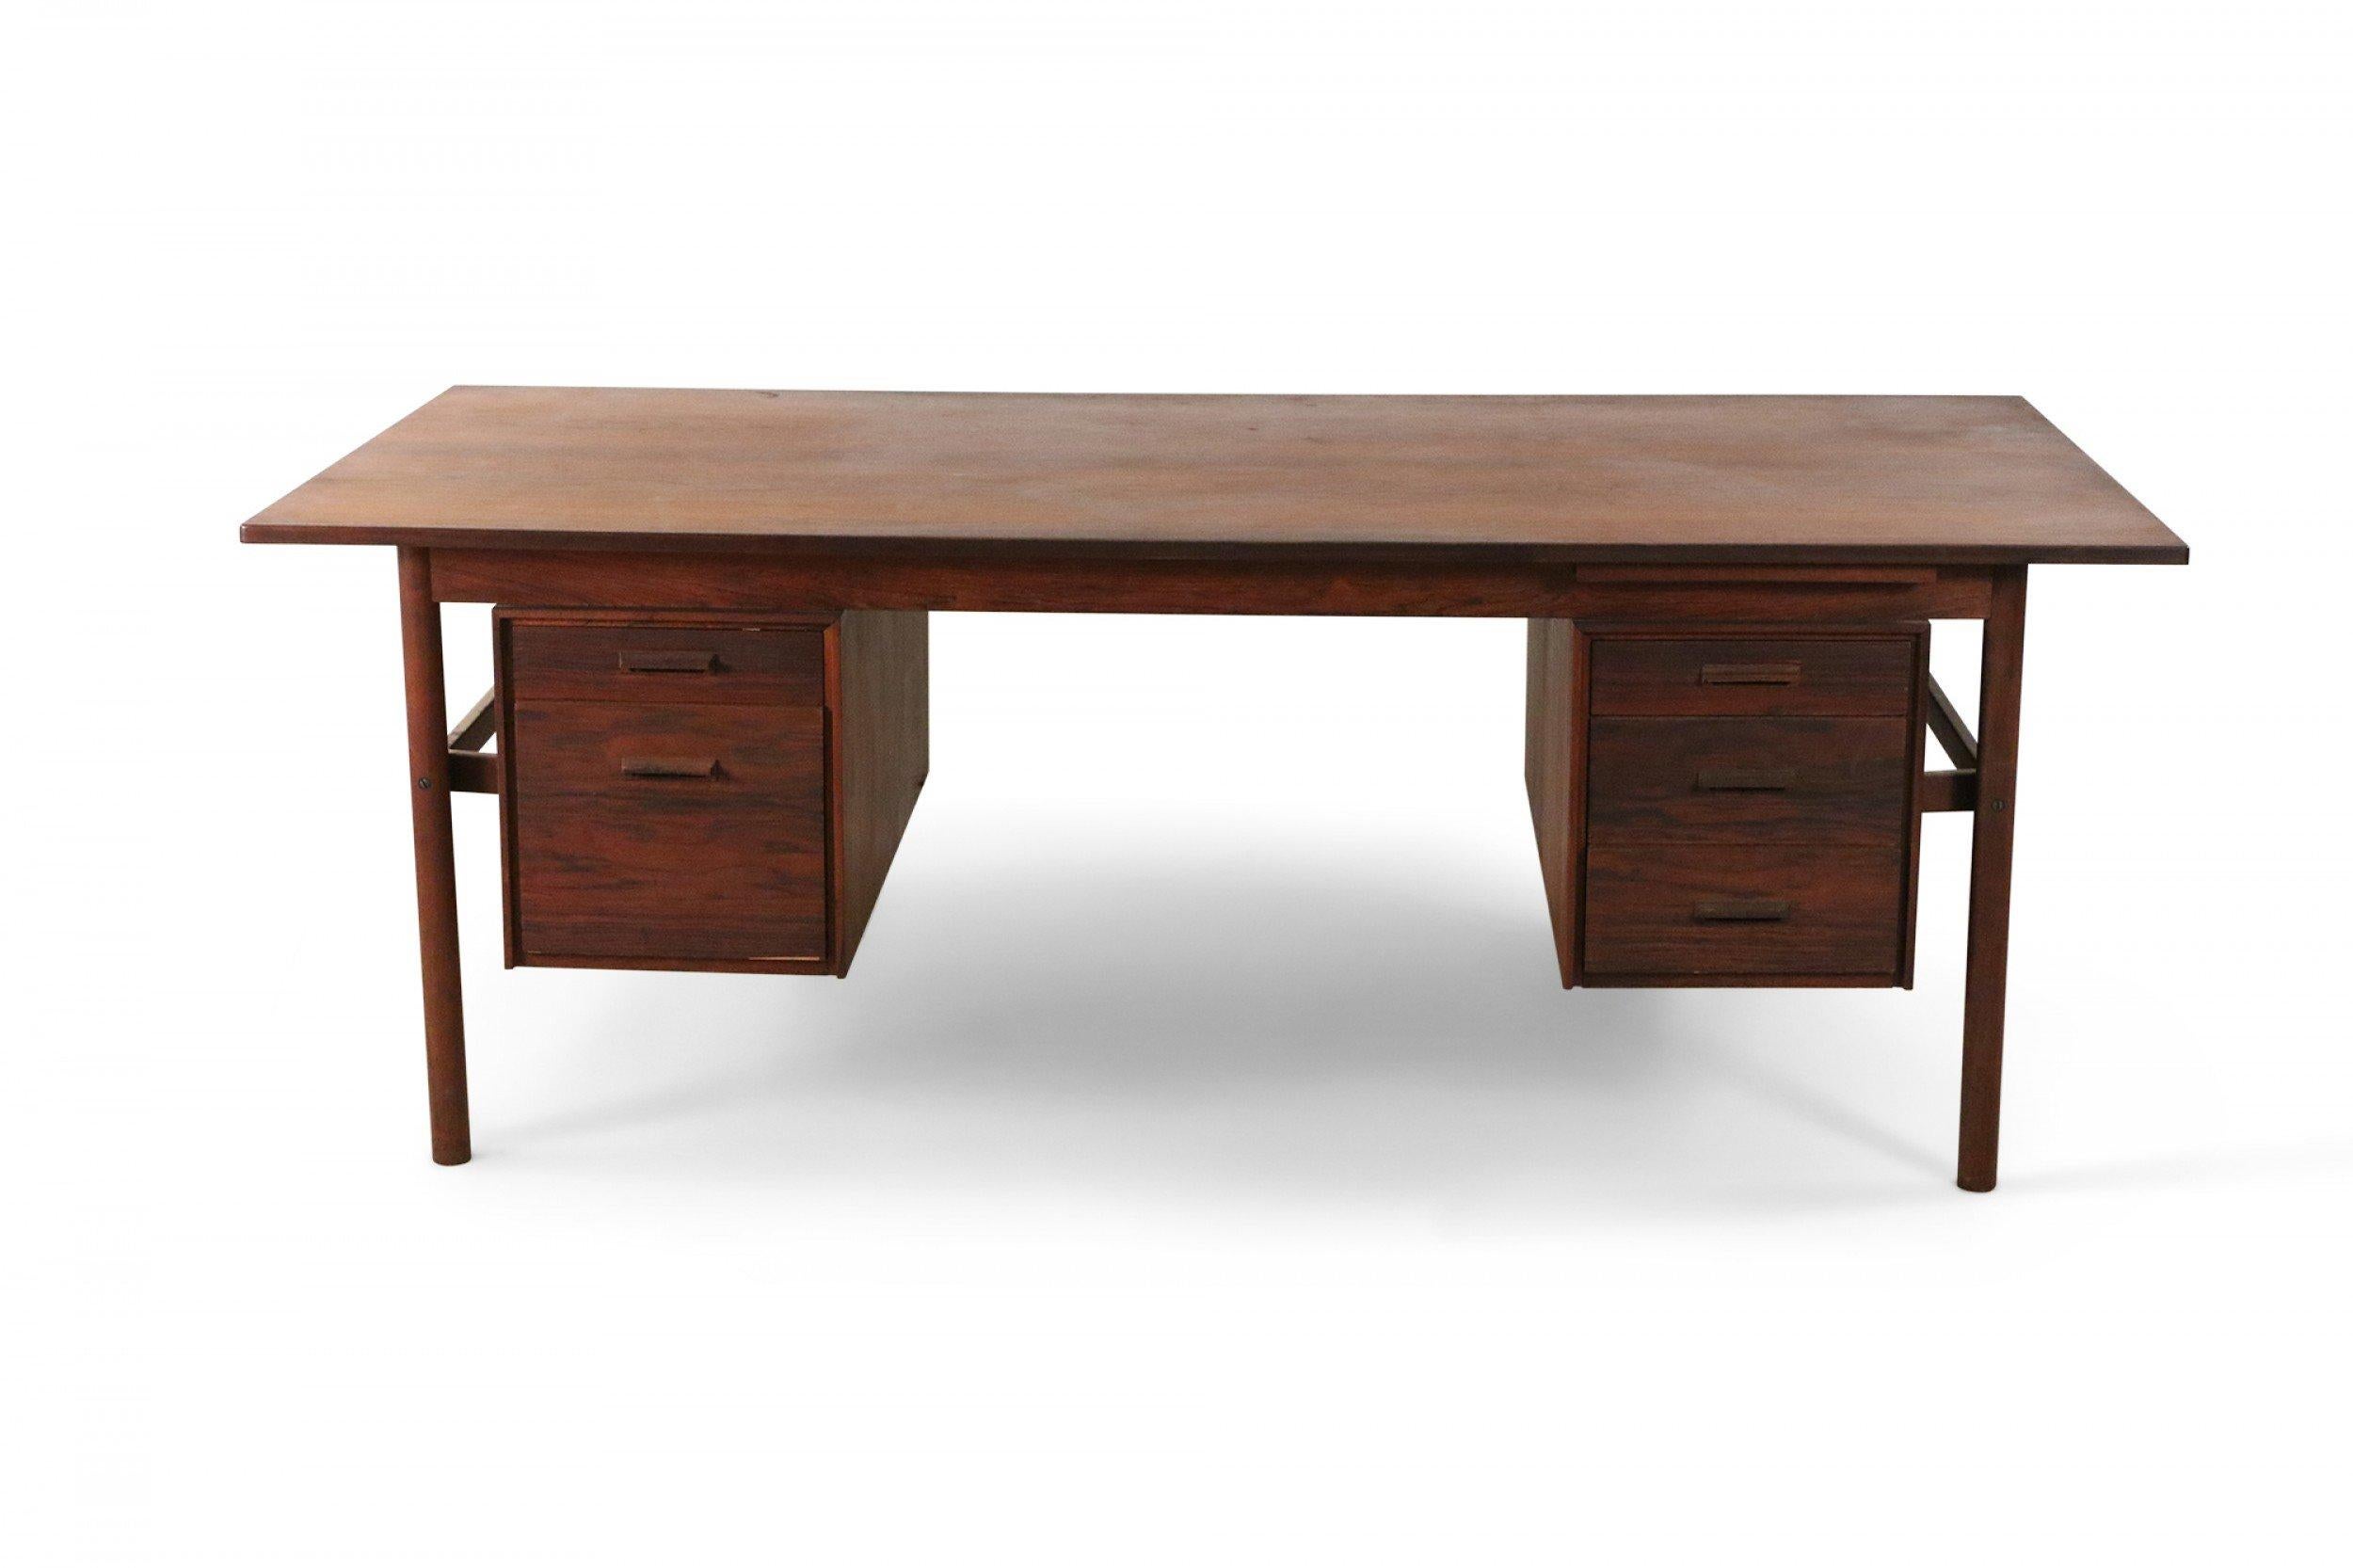 Midcentury Danish wood desk with rectangular top and two sets of drawers float-mounted under the desktop (2 drawers on left, 3 drawers on right).